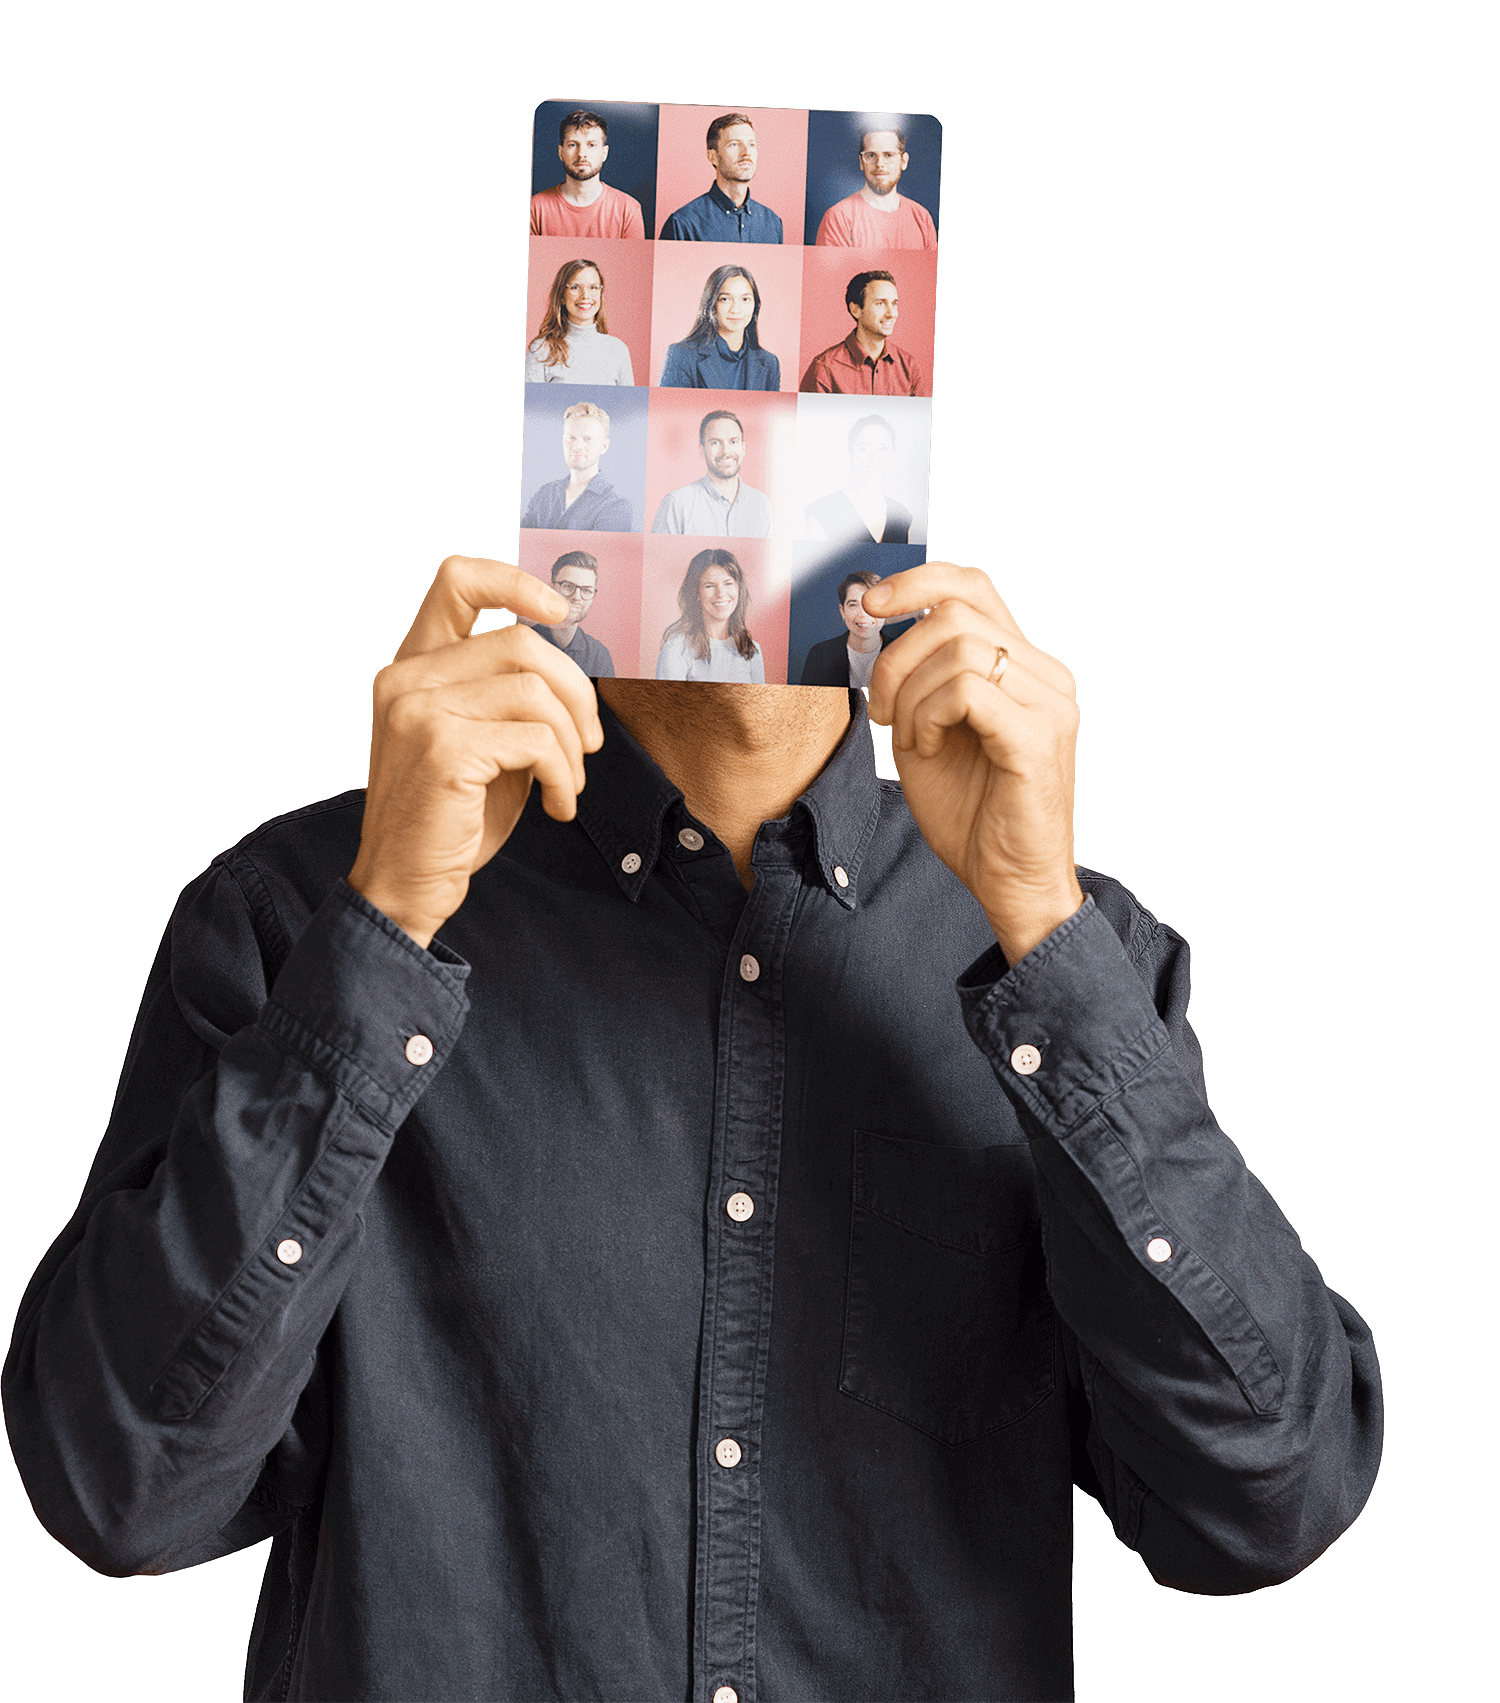 A person holding up a picture of employees